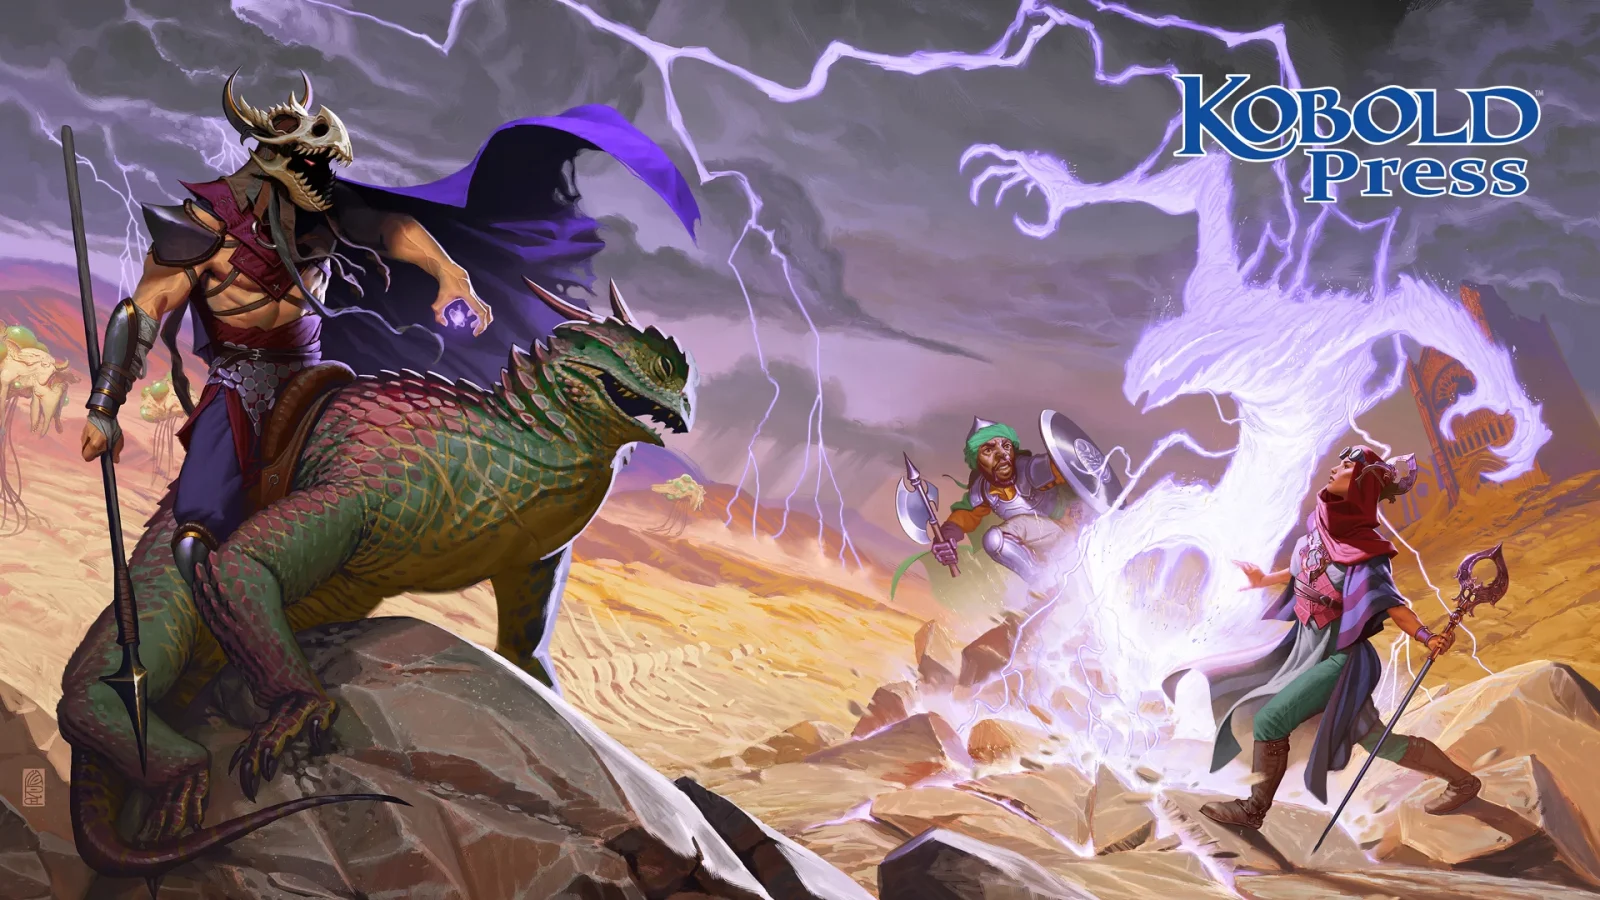 Last Chance To Get in On This Amazing Kobold Press and Friends 5E